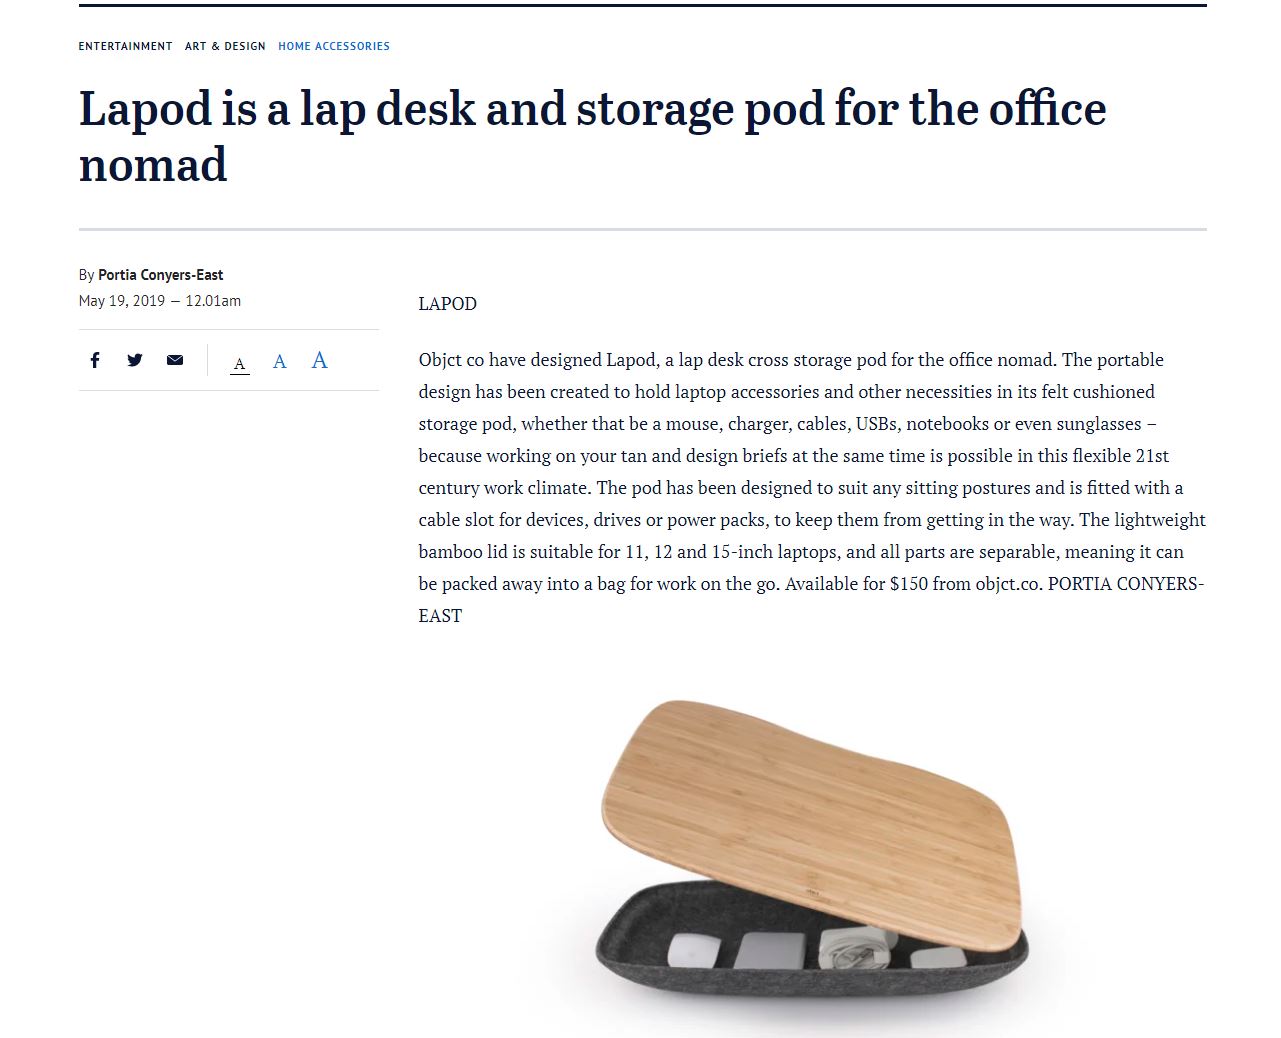 LAPOD lap desk in The Age and Sydney Morning Herald newspapers